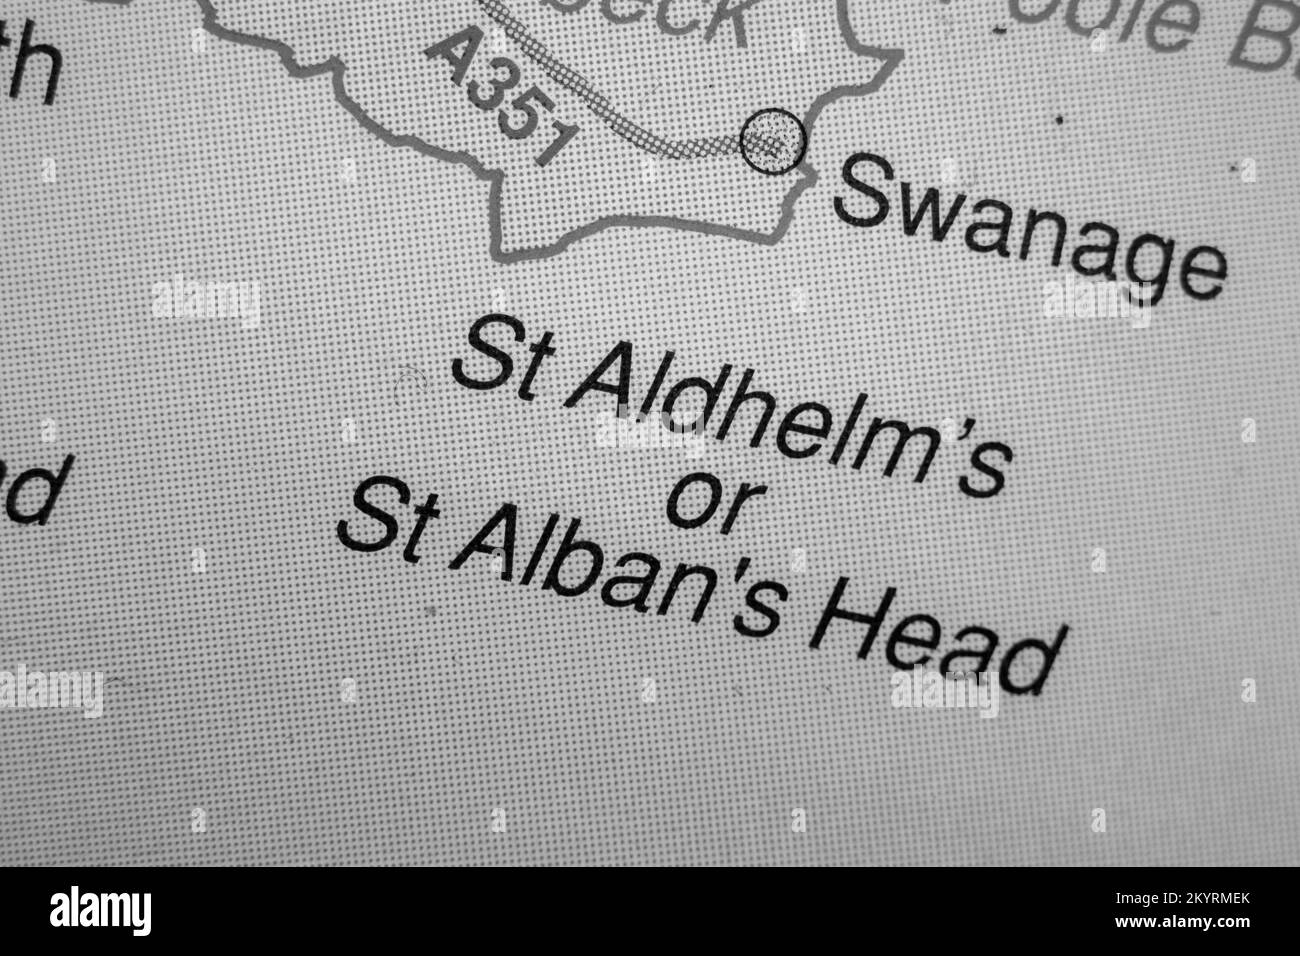 St Aldhelm's or St Alban's Head, United Kingdom atlas map town name - black and white Stock Photo